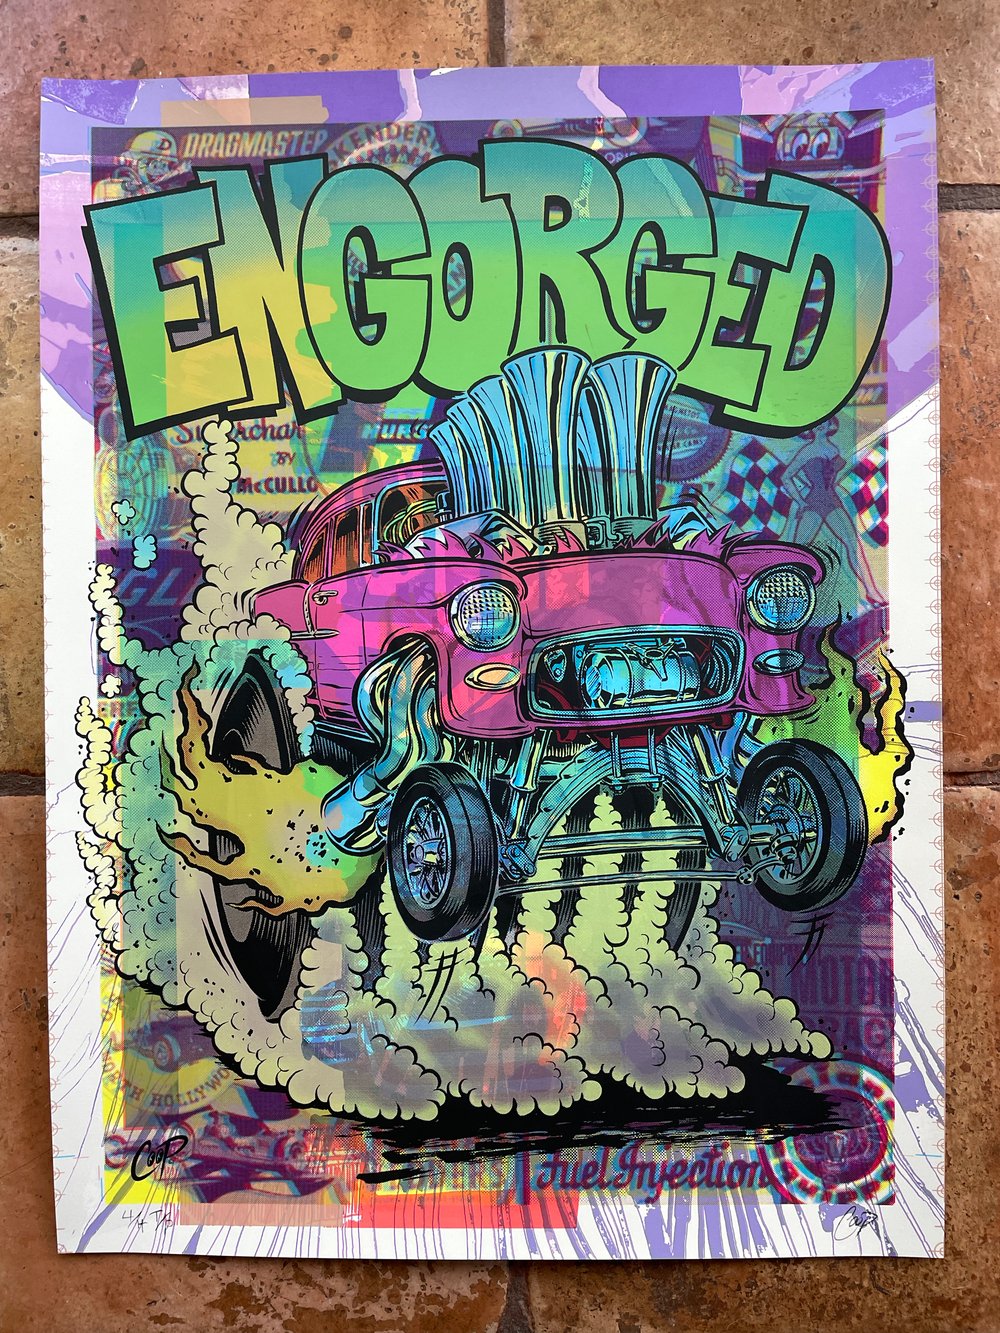 Image of TEST PRINT TUESDAY #7 Engorged